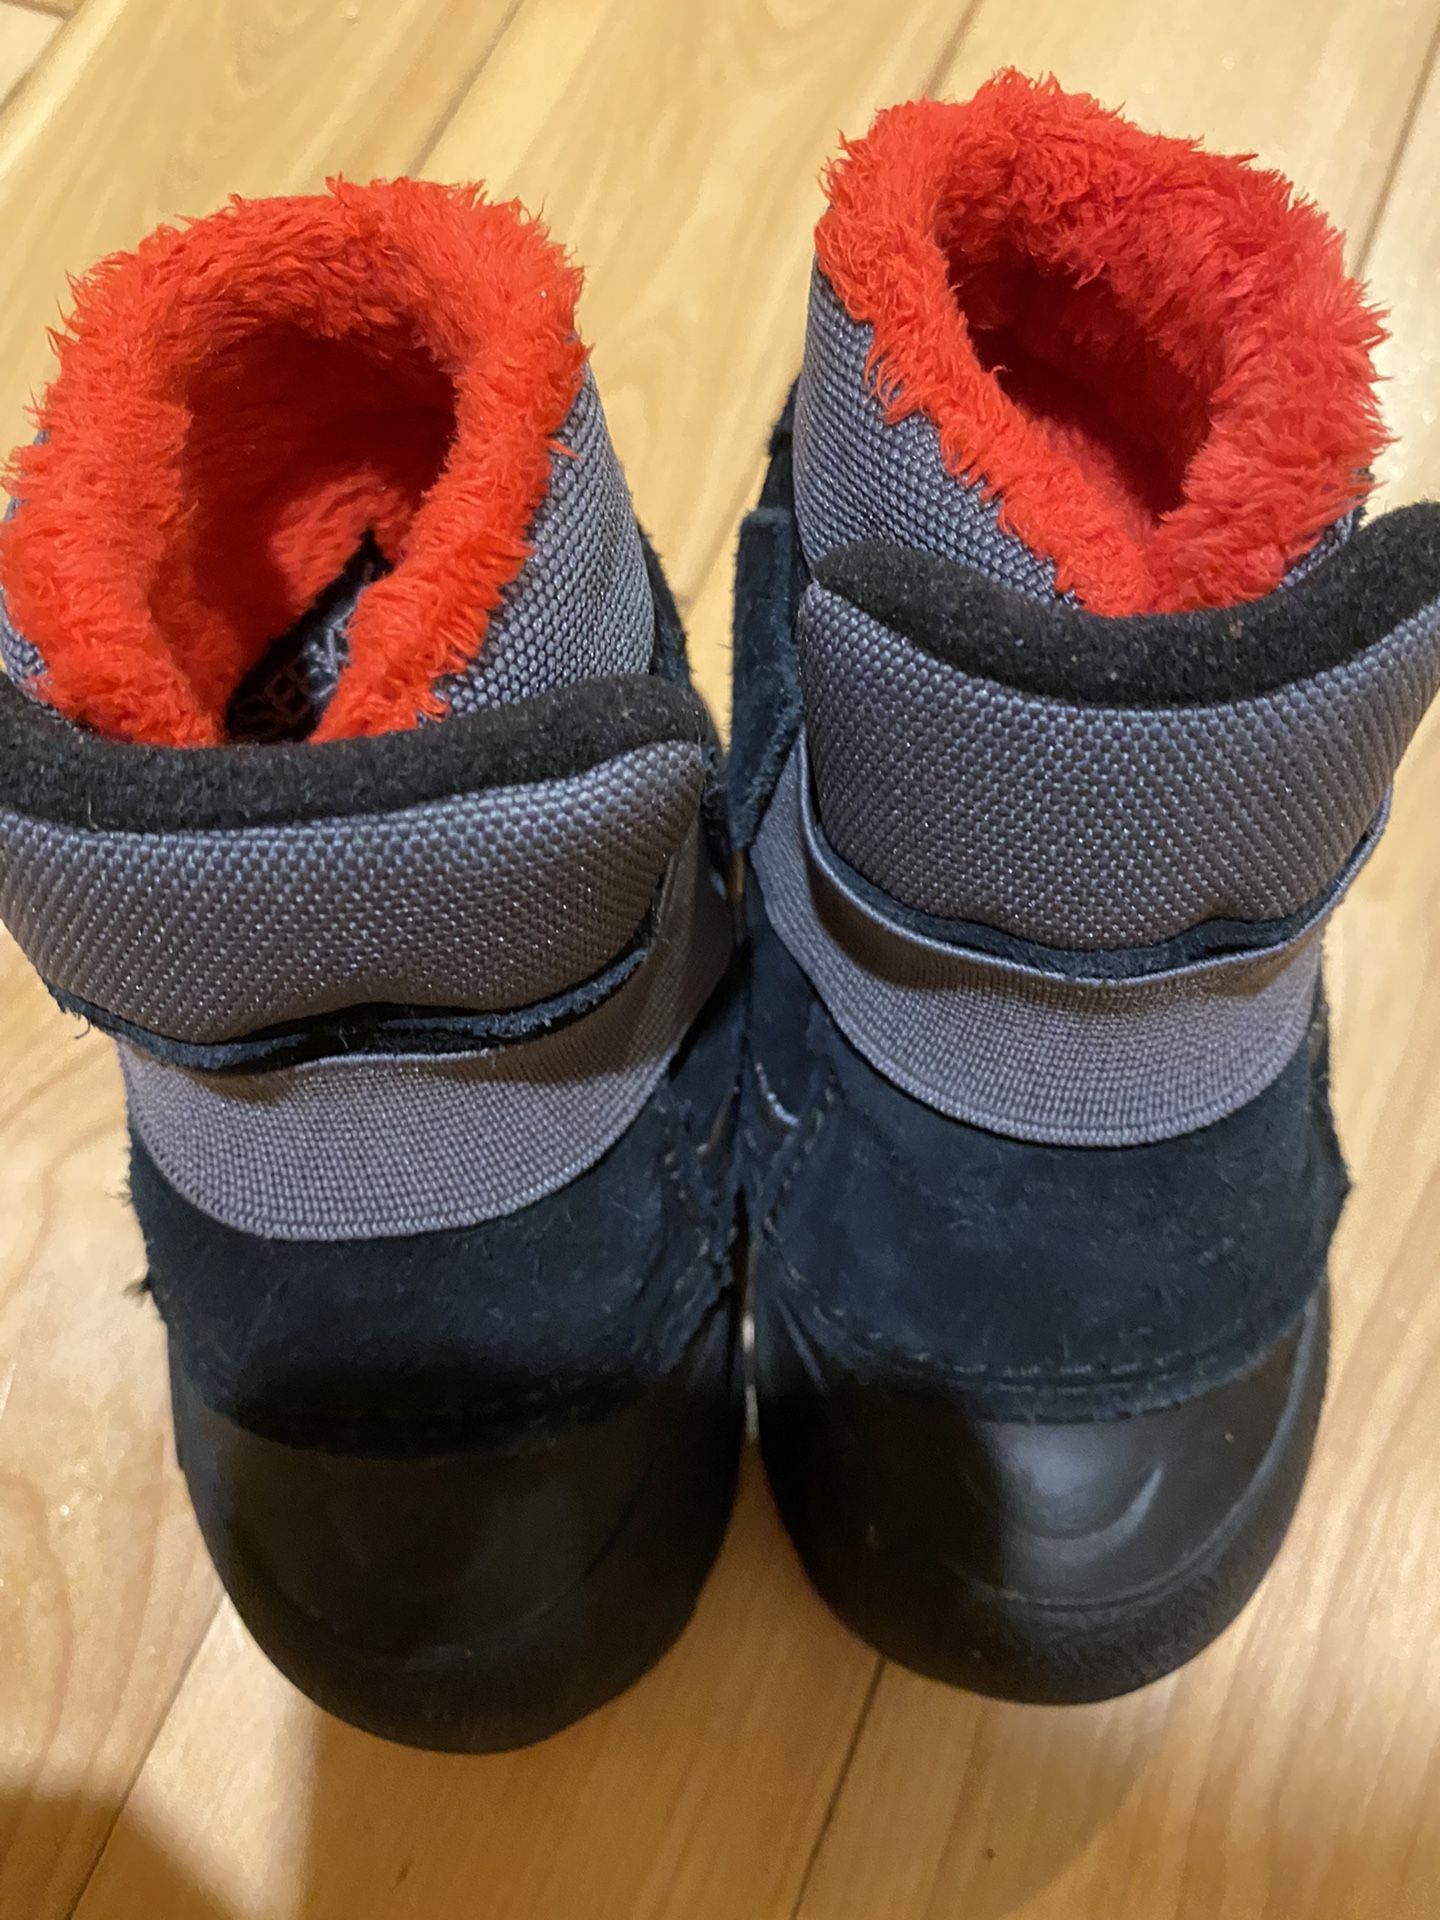 North Face Snow Boots (5 Size )